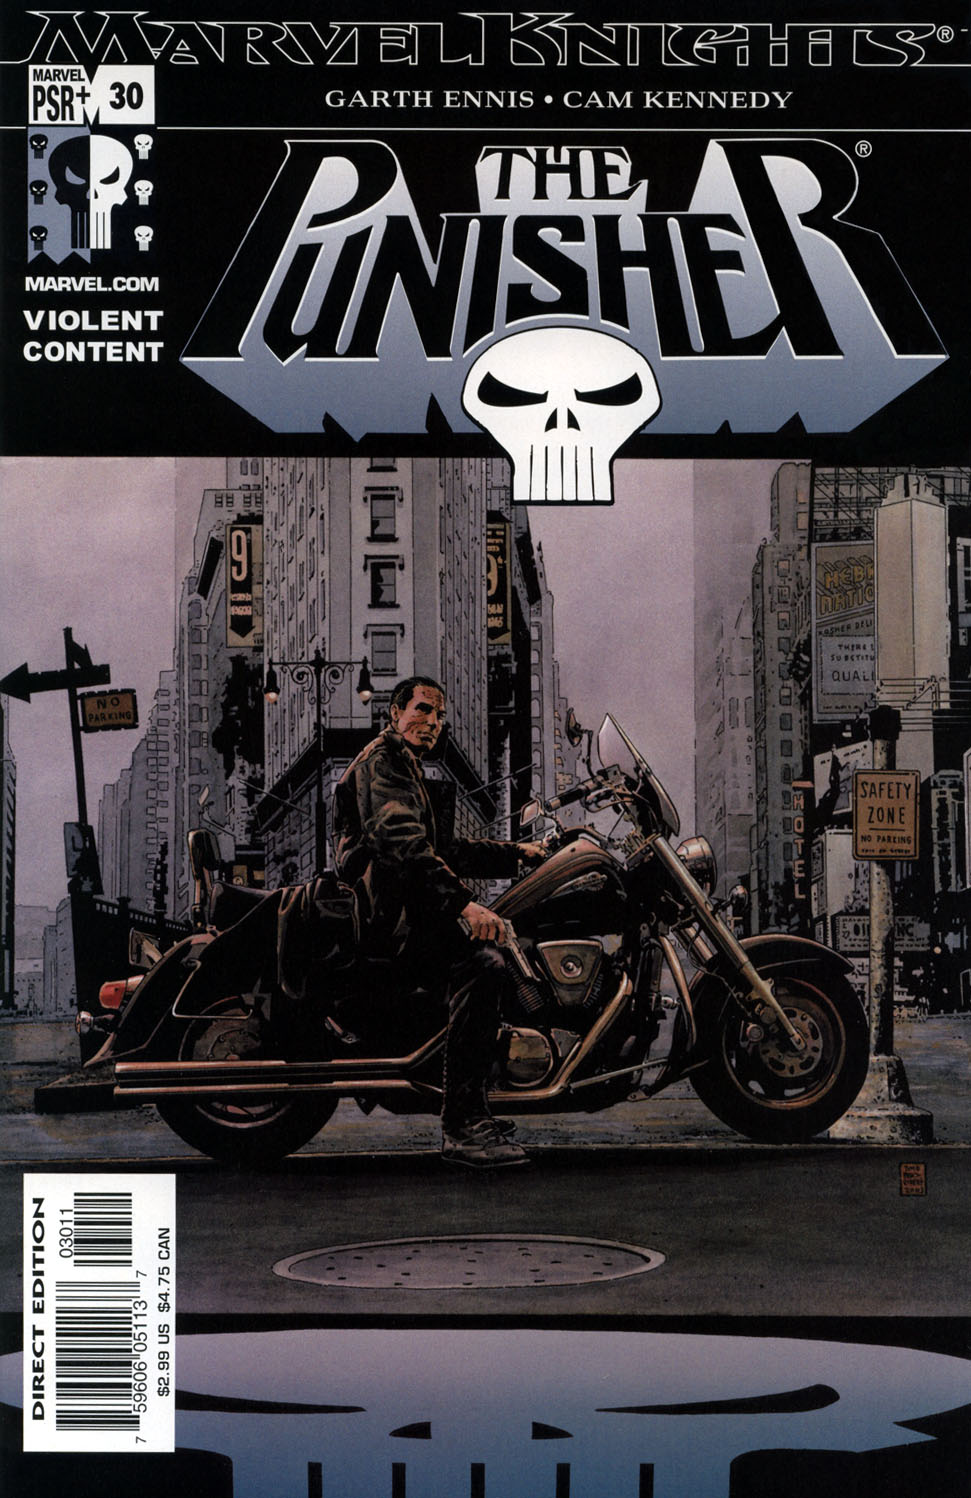 The Punisher (2001) issue 30 - Streets of Laredo #03 - Page 1